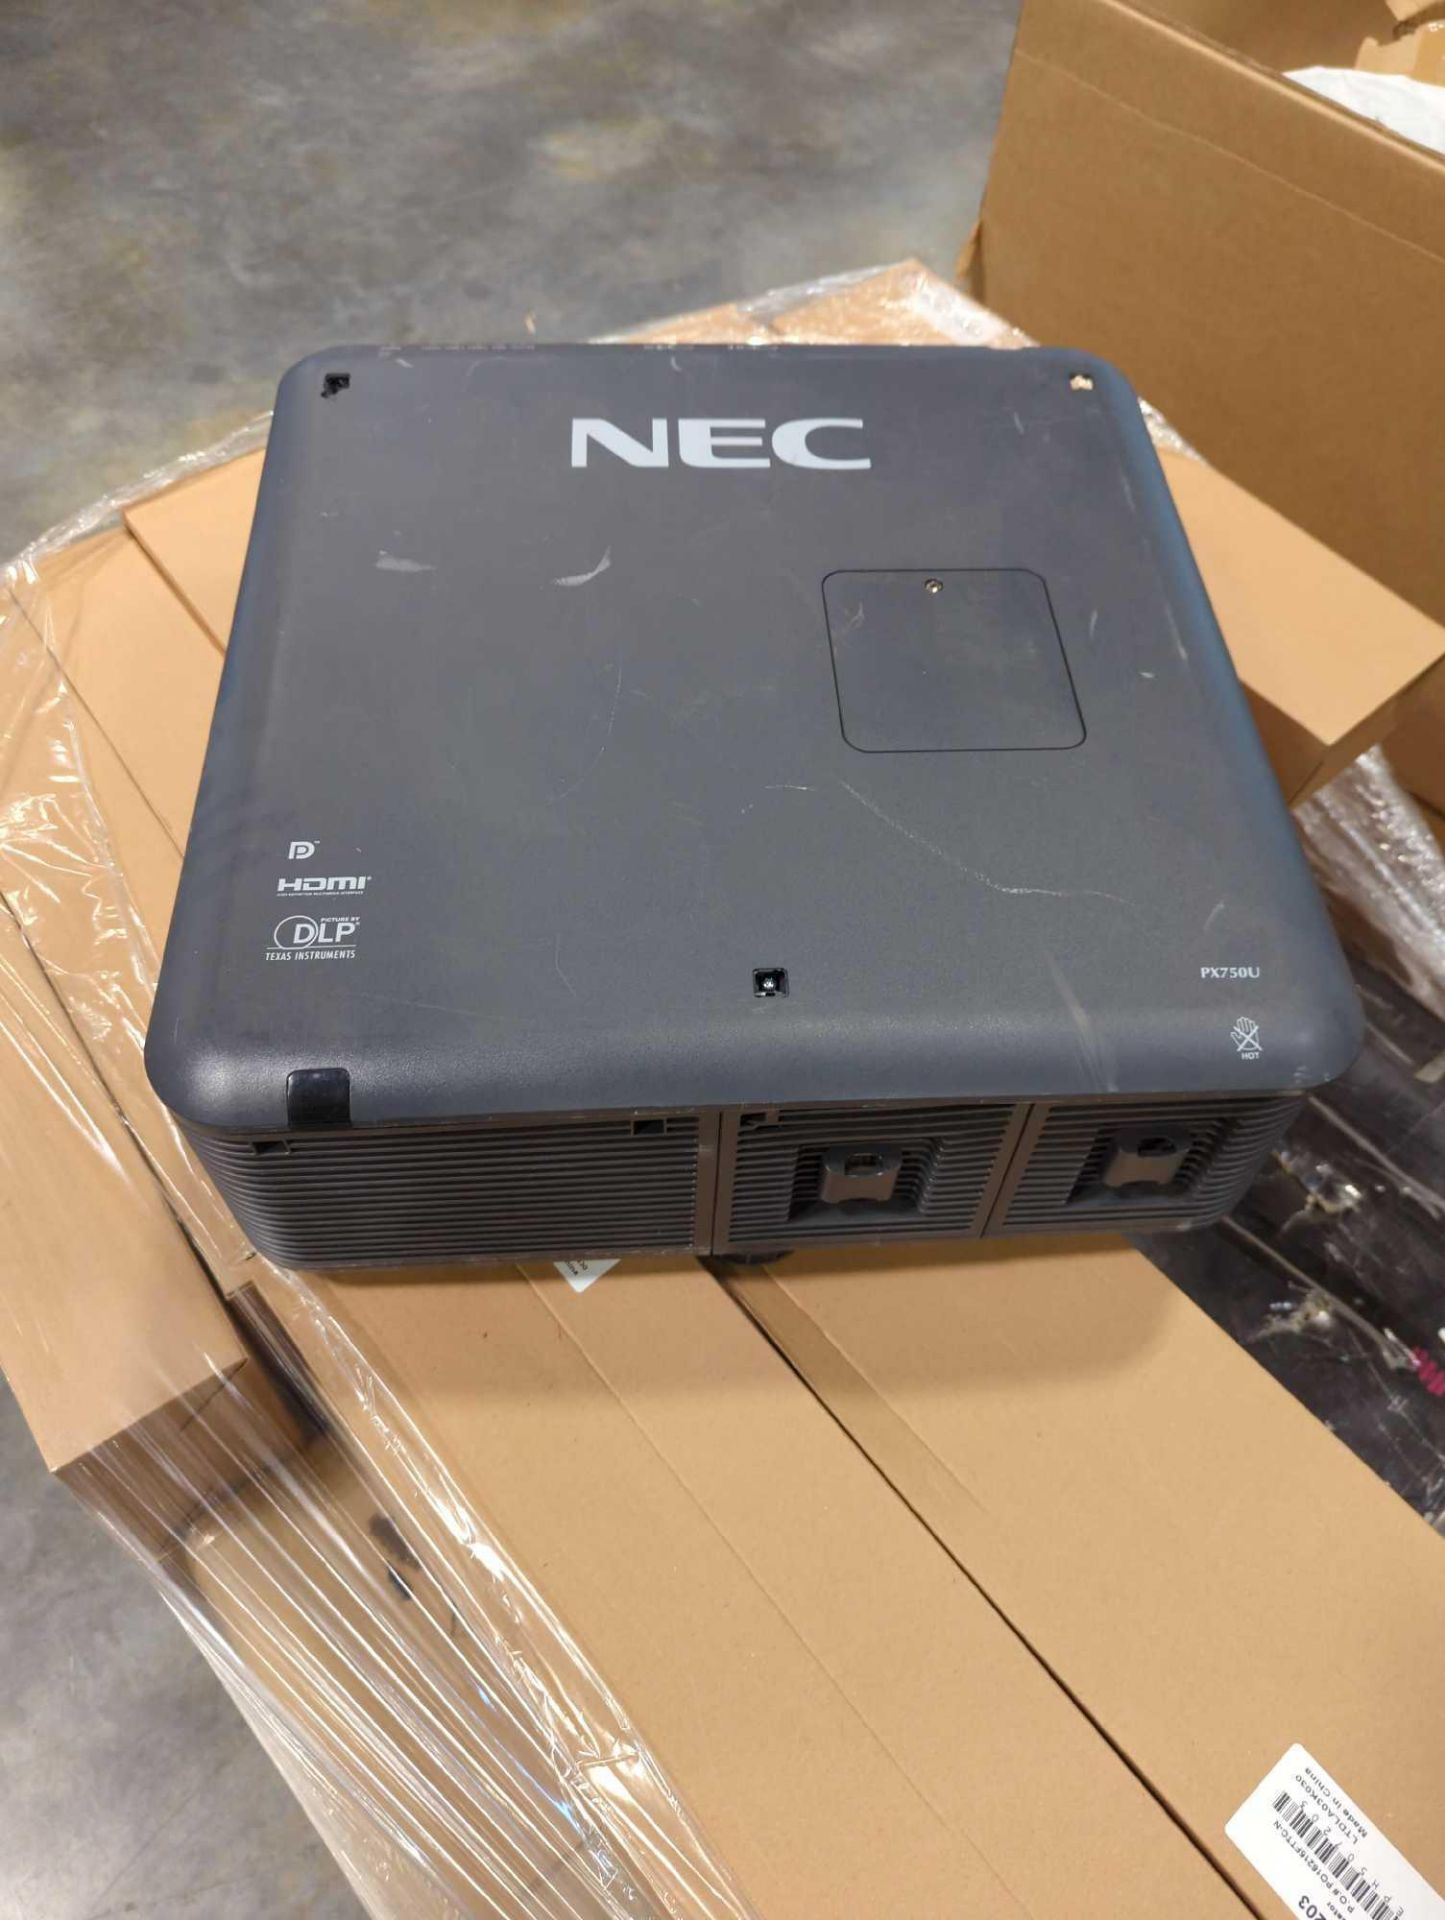 NEC Projector, Coilover Kits - Image 2 of 8